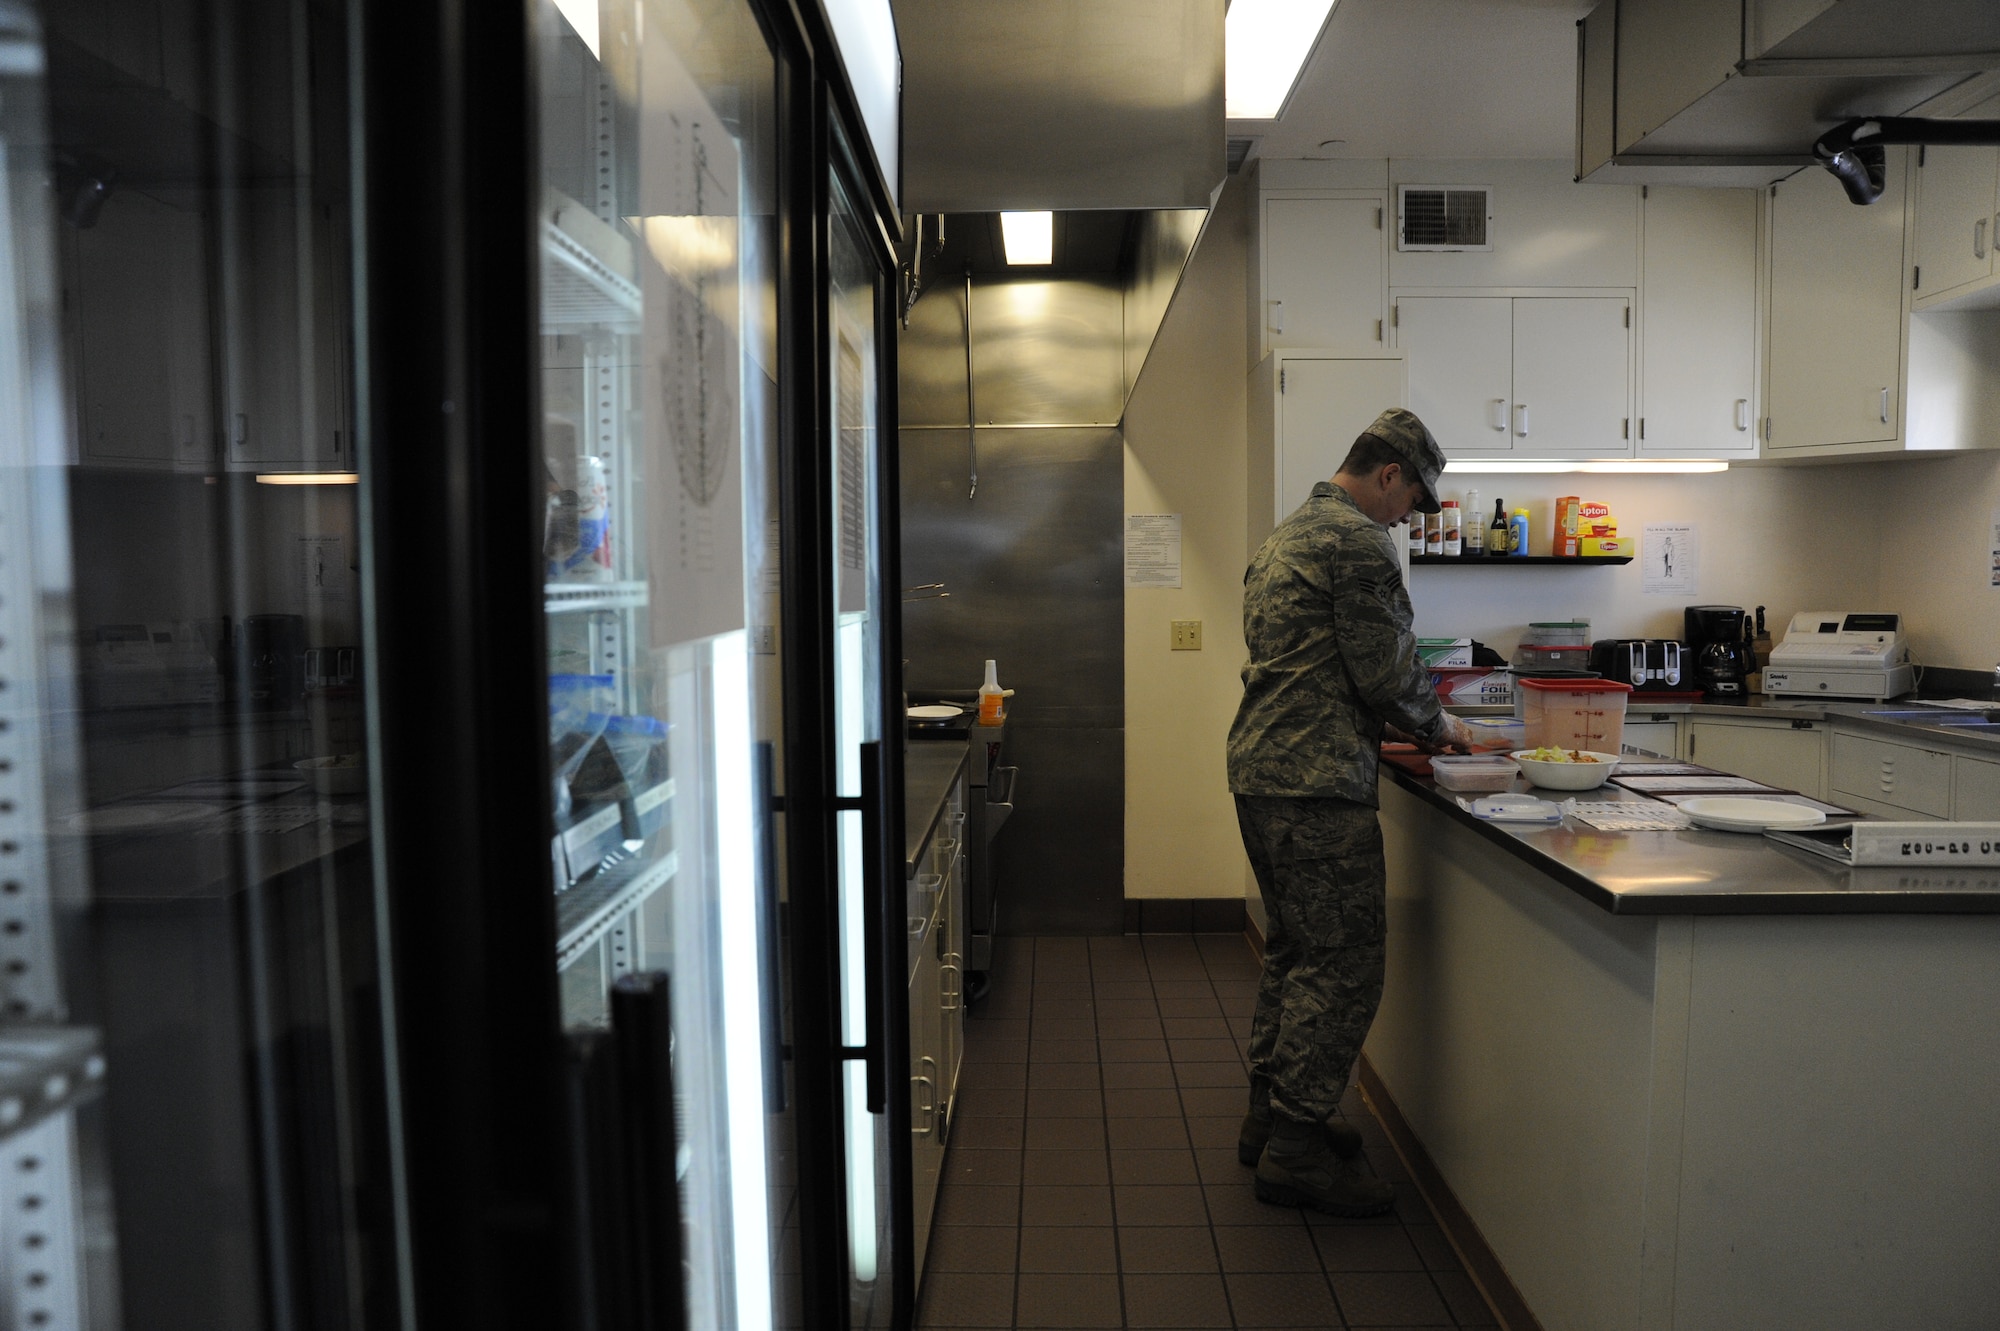 Senior Airman Christopher Kolp prepares meals for Airmen while they are working at the missile alert facility March 27, 2013, at F.E. Warren Air Force Base, Wyo. Kolp is responsible for cooking three meals a day for the crews in the MAF and performs the dining facility functions on his own. Kolp is assigned to the 320th Missile Squadron. (U.S. Air Force photo/Tech. Sgt. Mareshah Haynes)